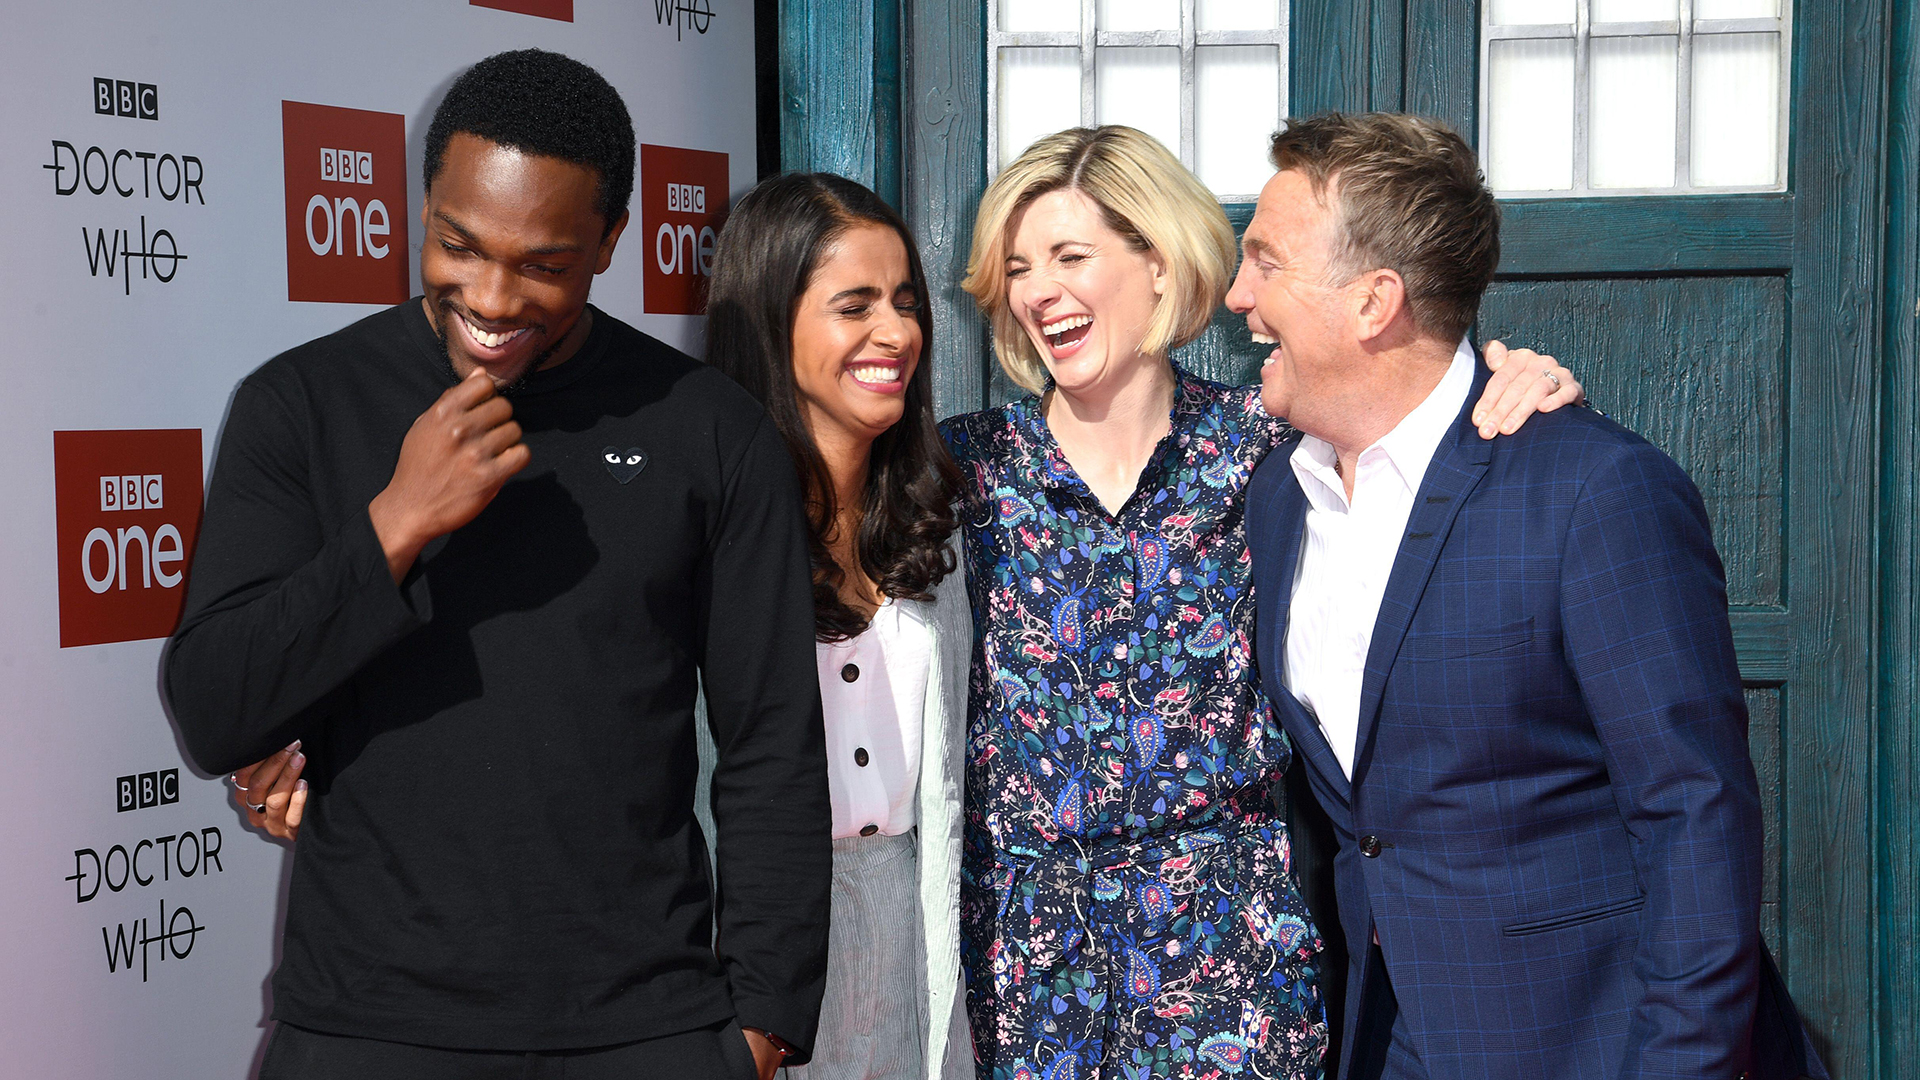 Castmates Tosin Cole, Mandip Gill and Bradley Walsh join Jodie Whittaker at the Sheffield premiere of her first Doctor Who adventure The Woman Who Fell to Earth in 2018. Photo: Doug Peters/EMPICS